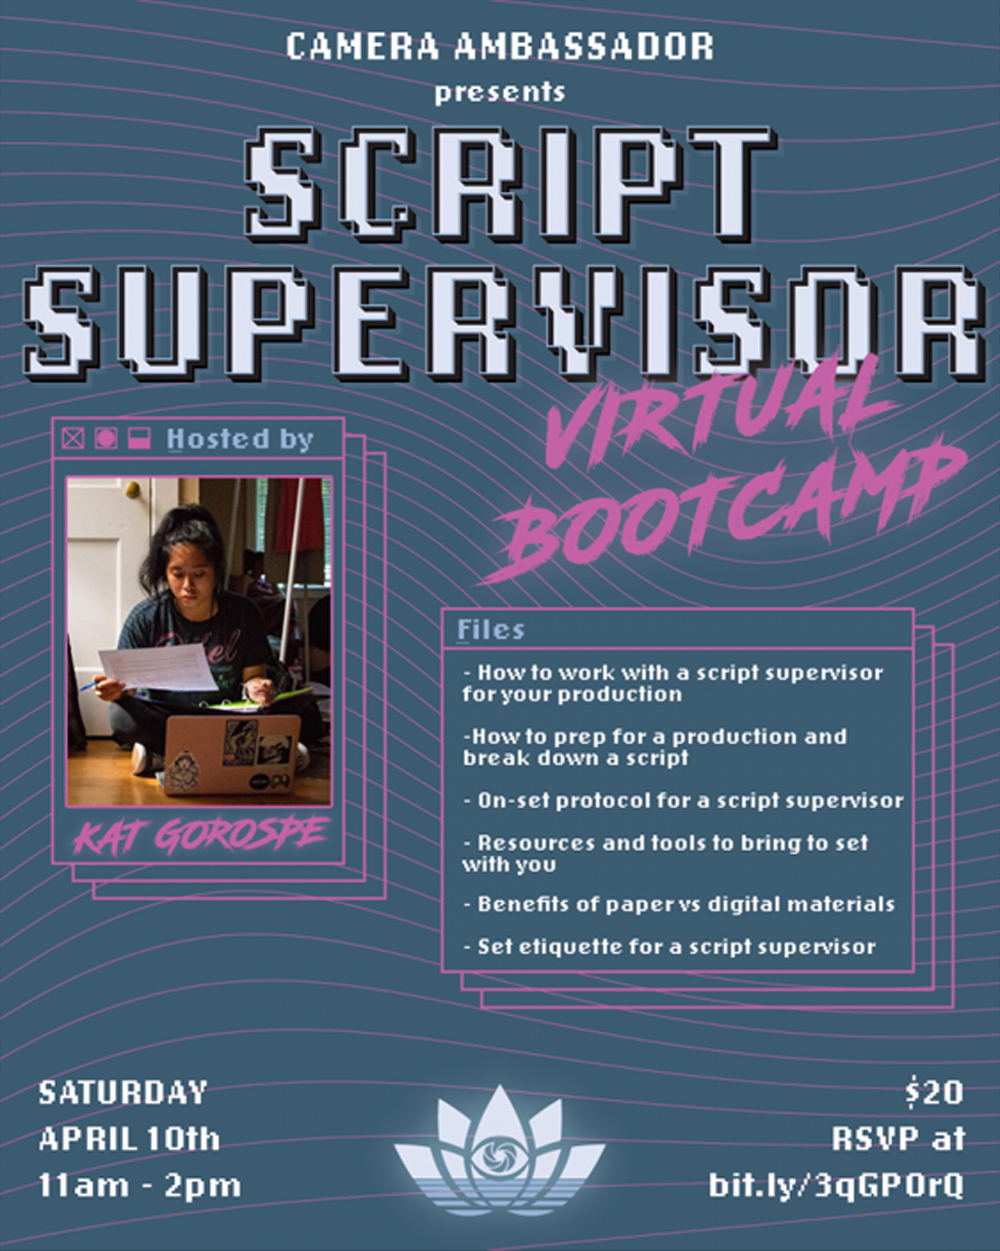 Script Supervisor Virtual Bootcamp. Hosted by Kat Gorospe. Saturday, April 10th 11am 2pm. $20. Click to RSVP.